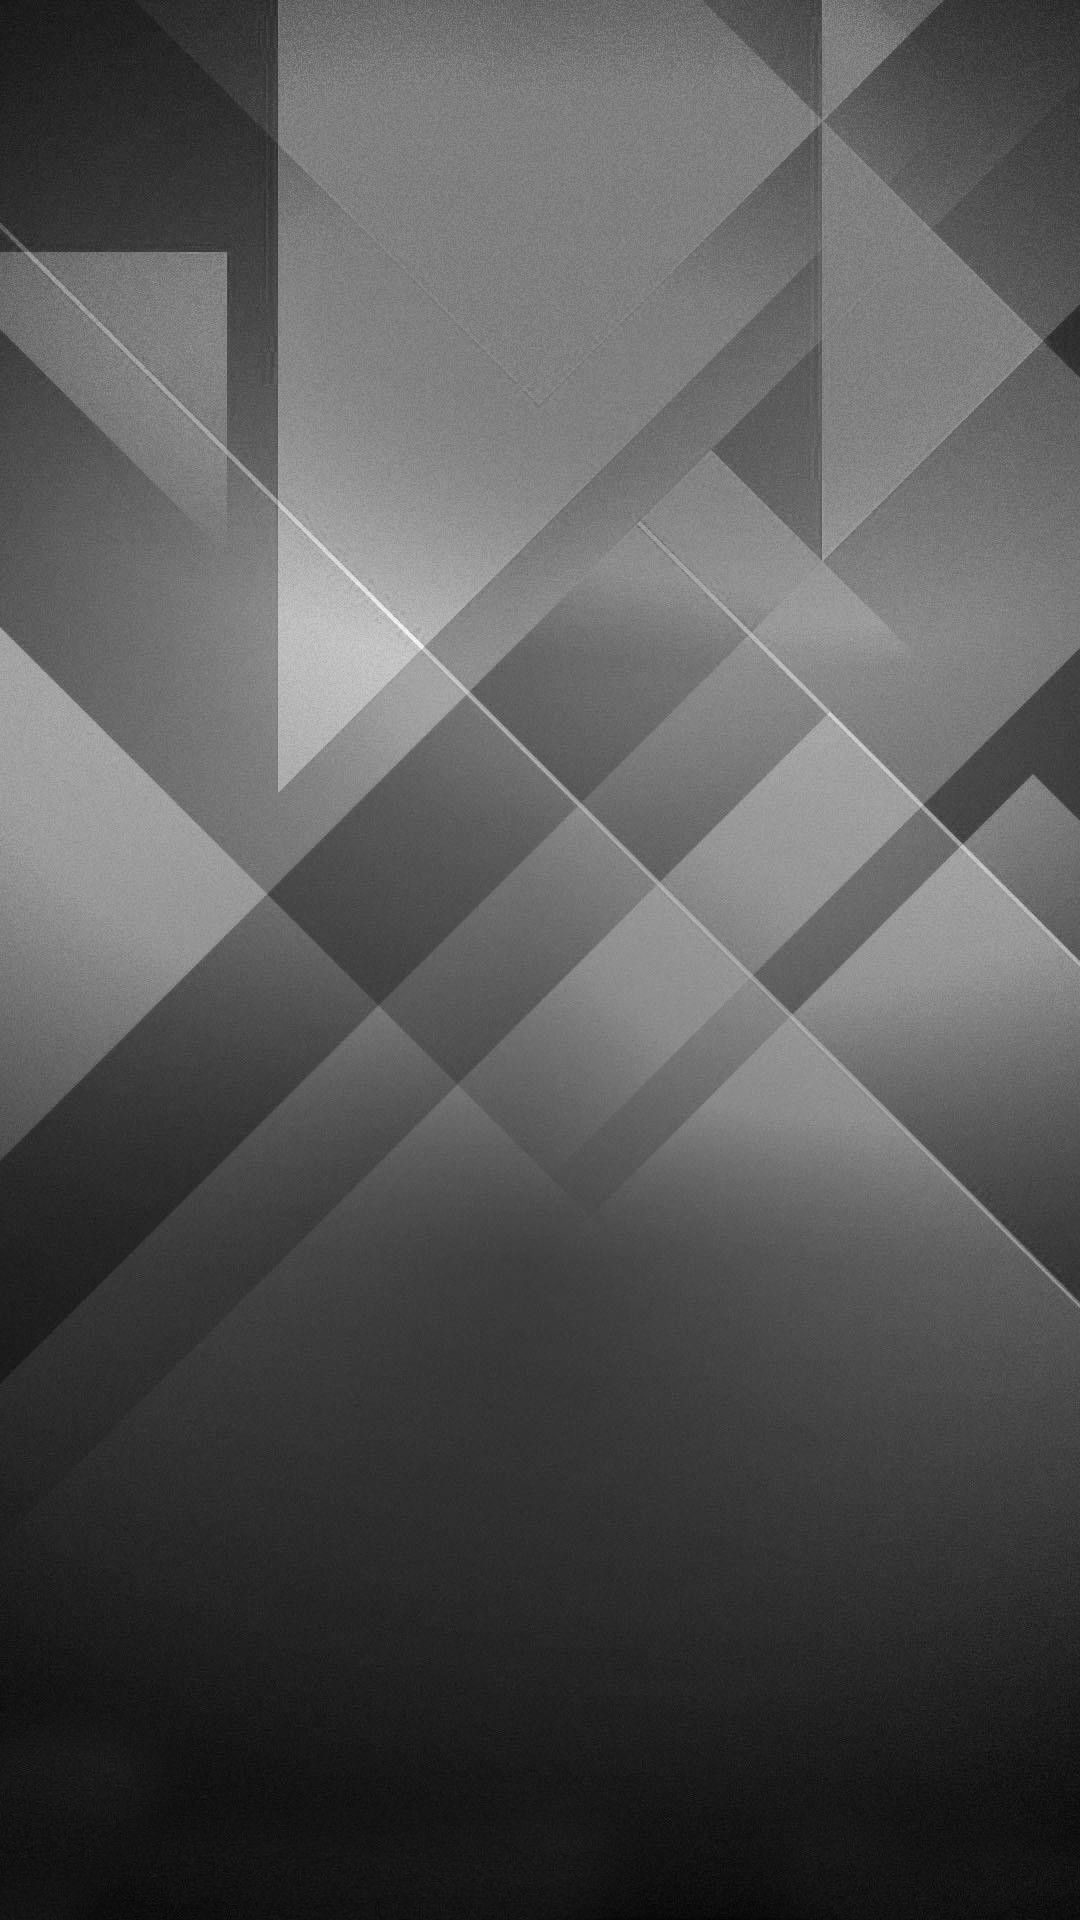 Black and White Abstract Wallpaper